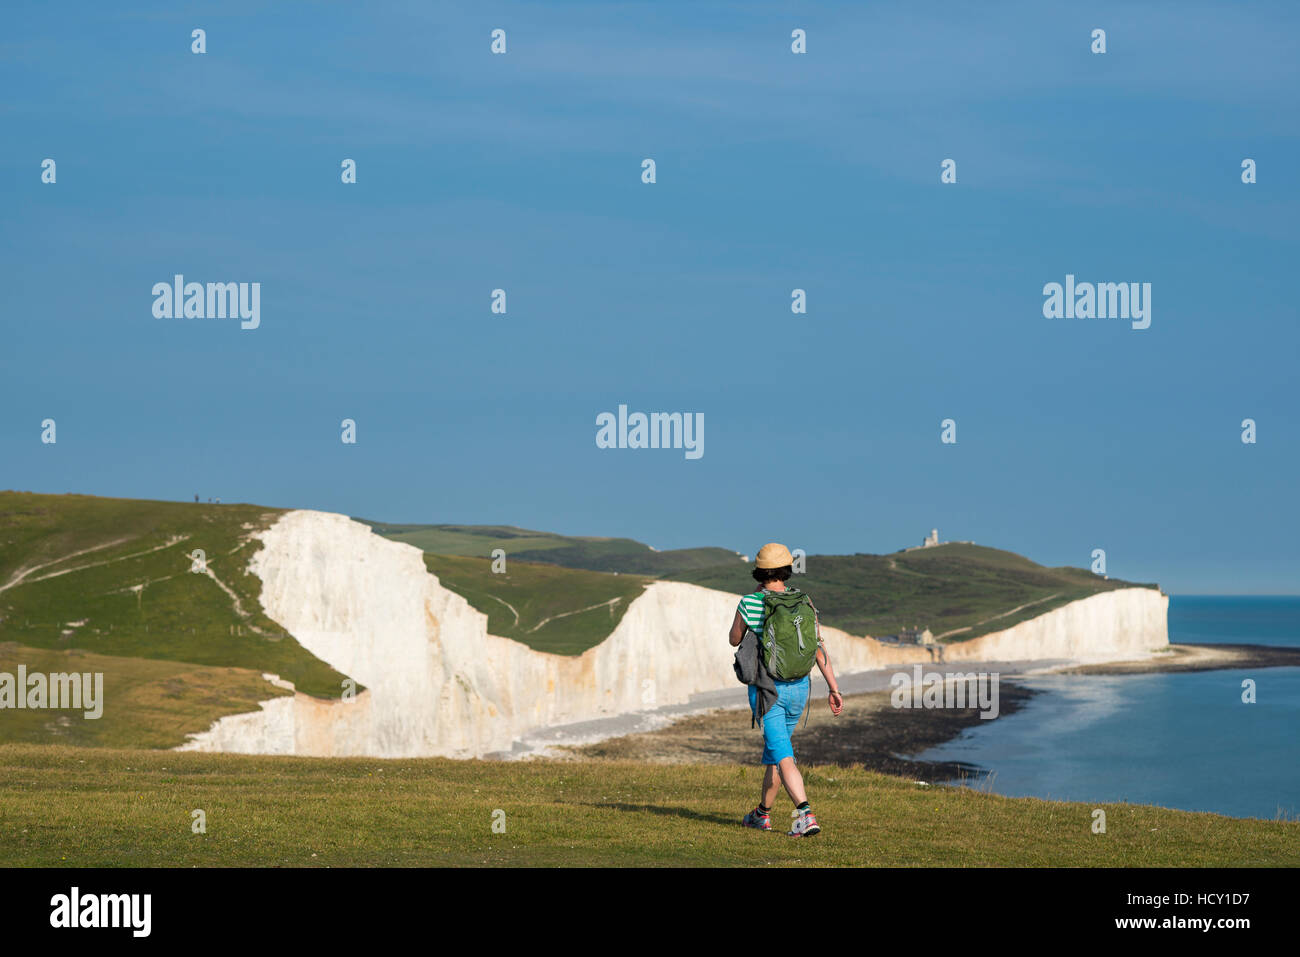 A woman walks along the cliffs near Beachy Head with views of the Seven Sisters, South Downs National Park, East Sussex, UK Stock Photo